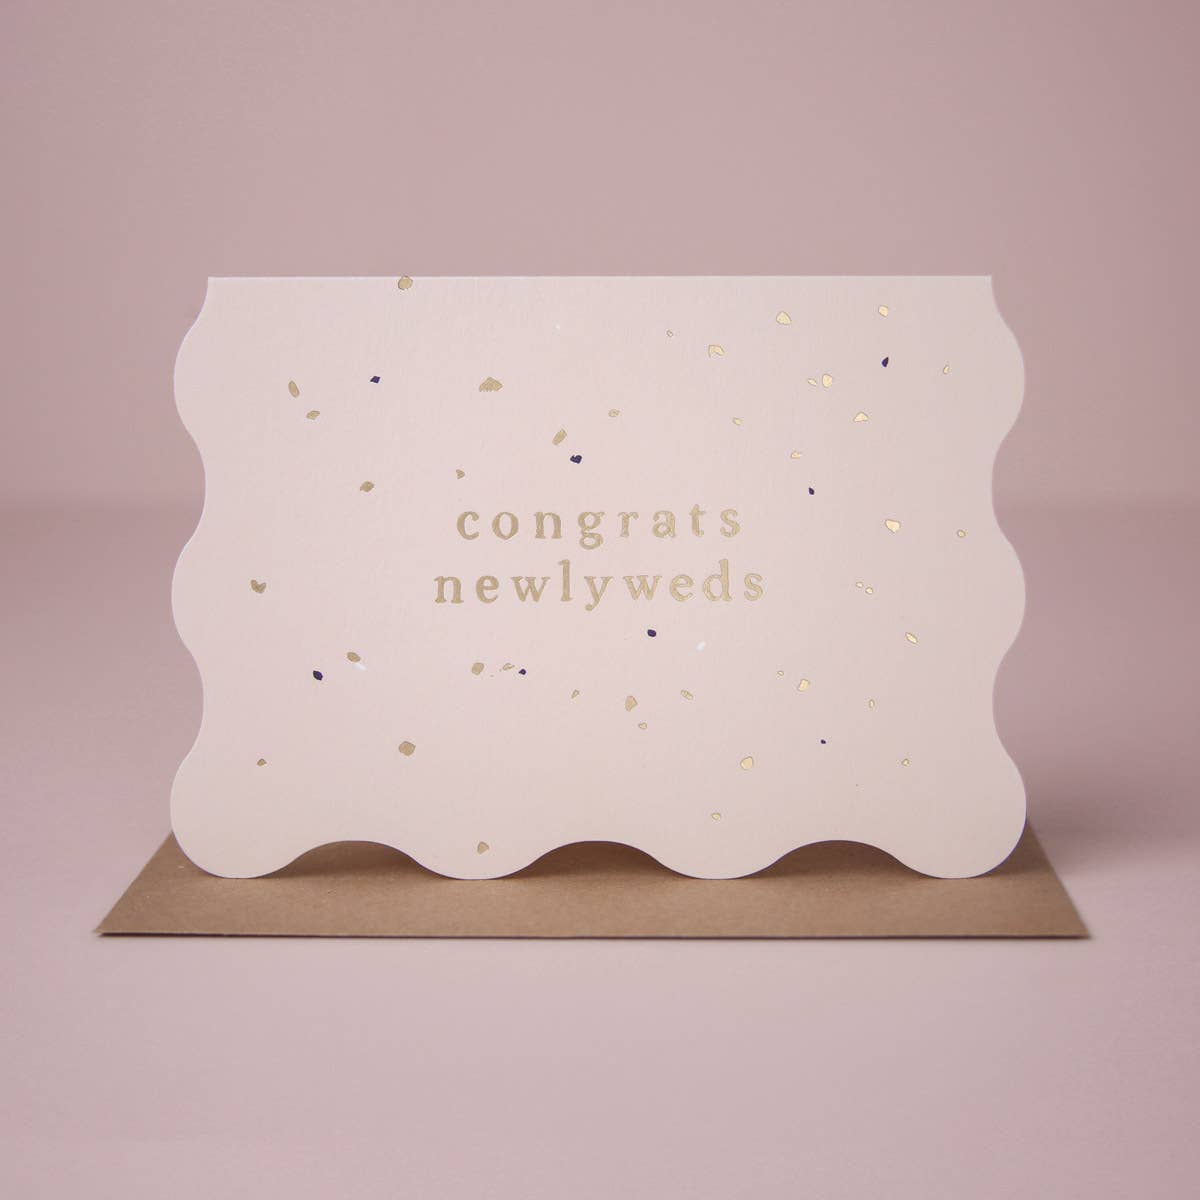 Newlyweds Wedding Card By Sister Paper Co.